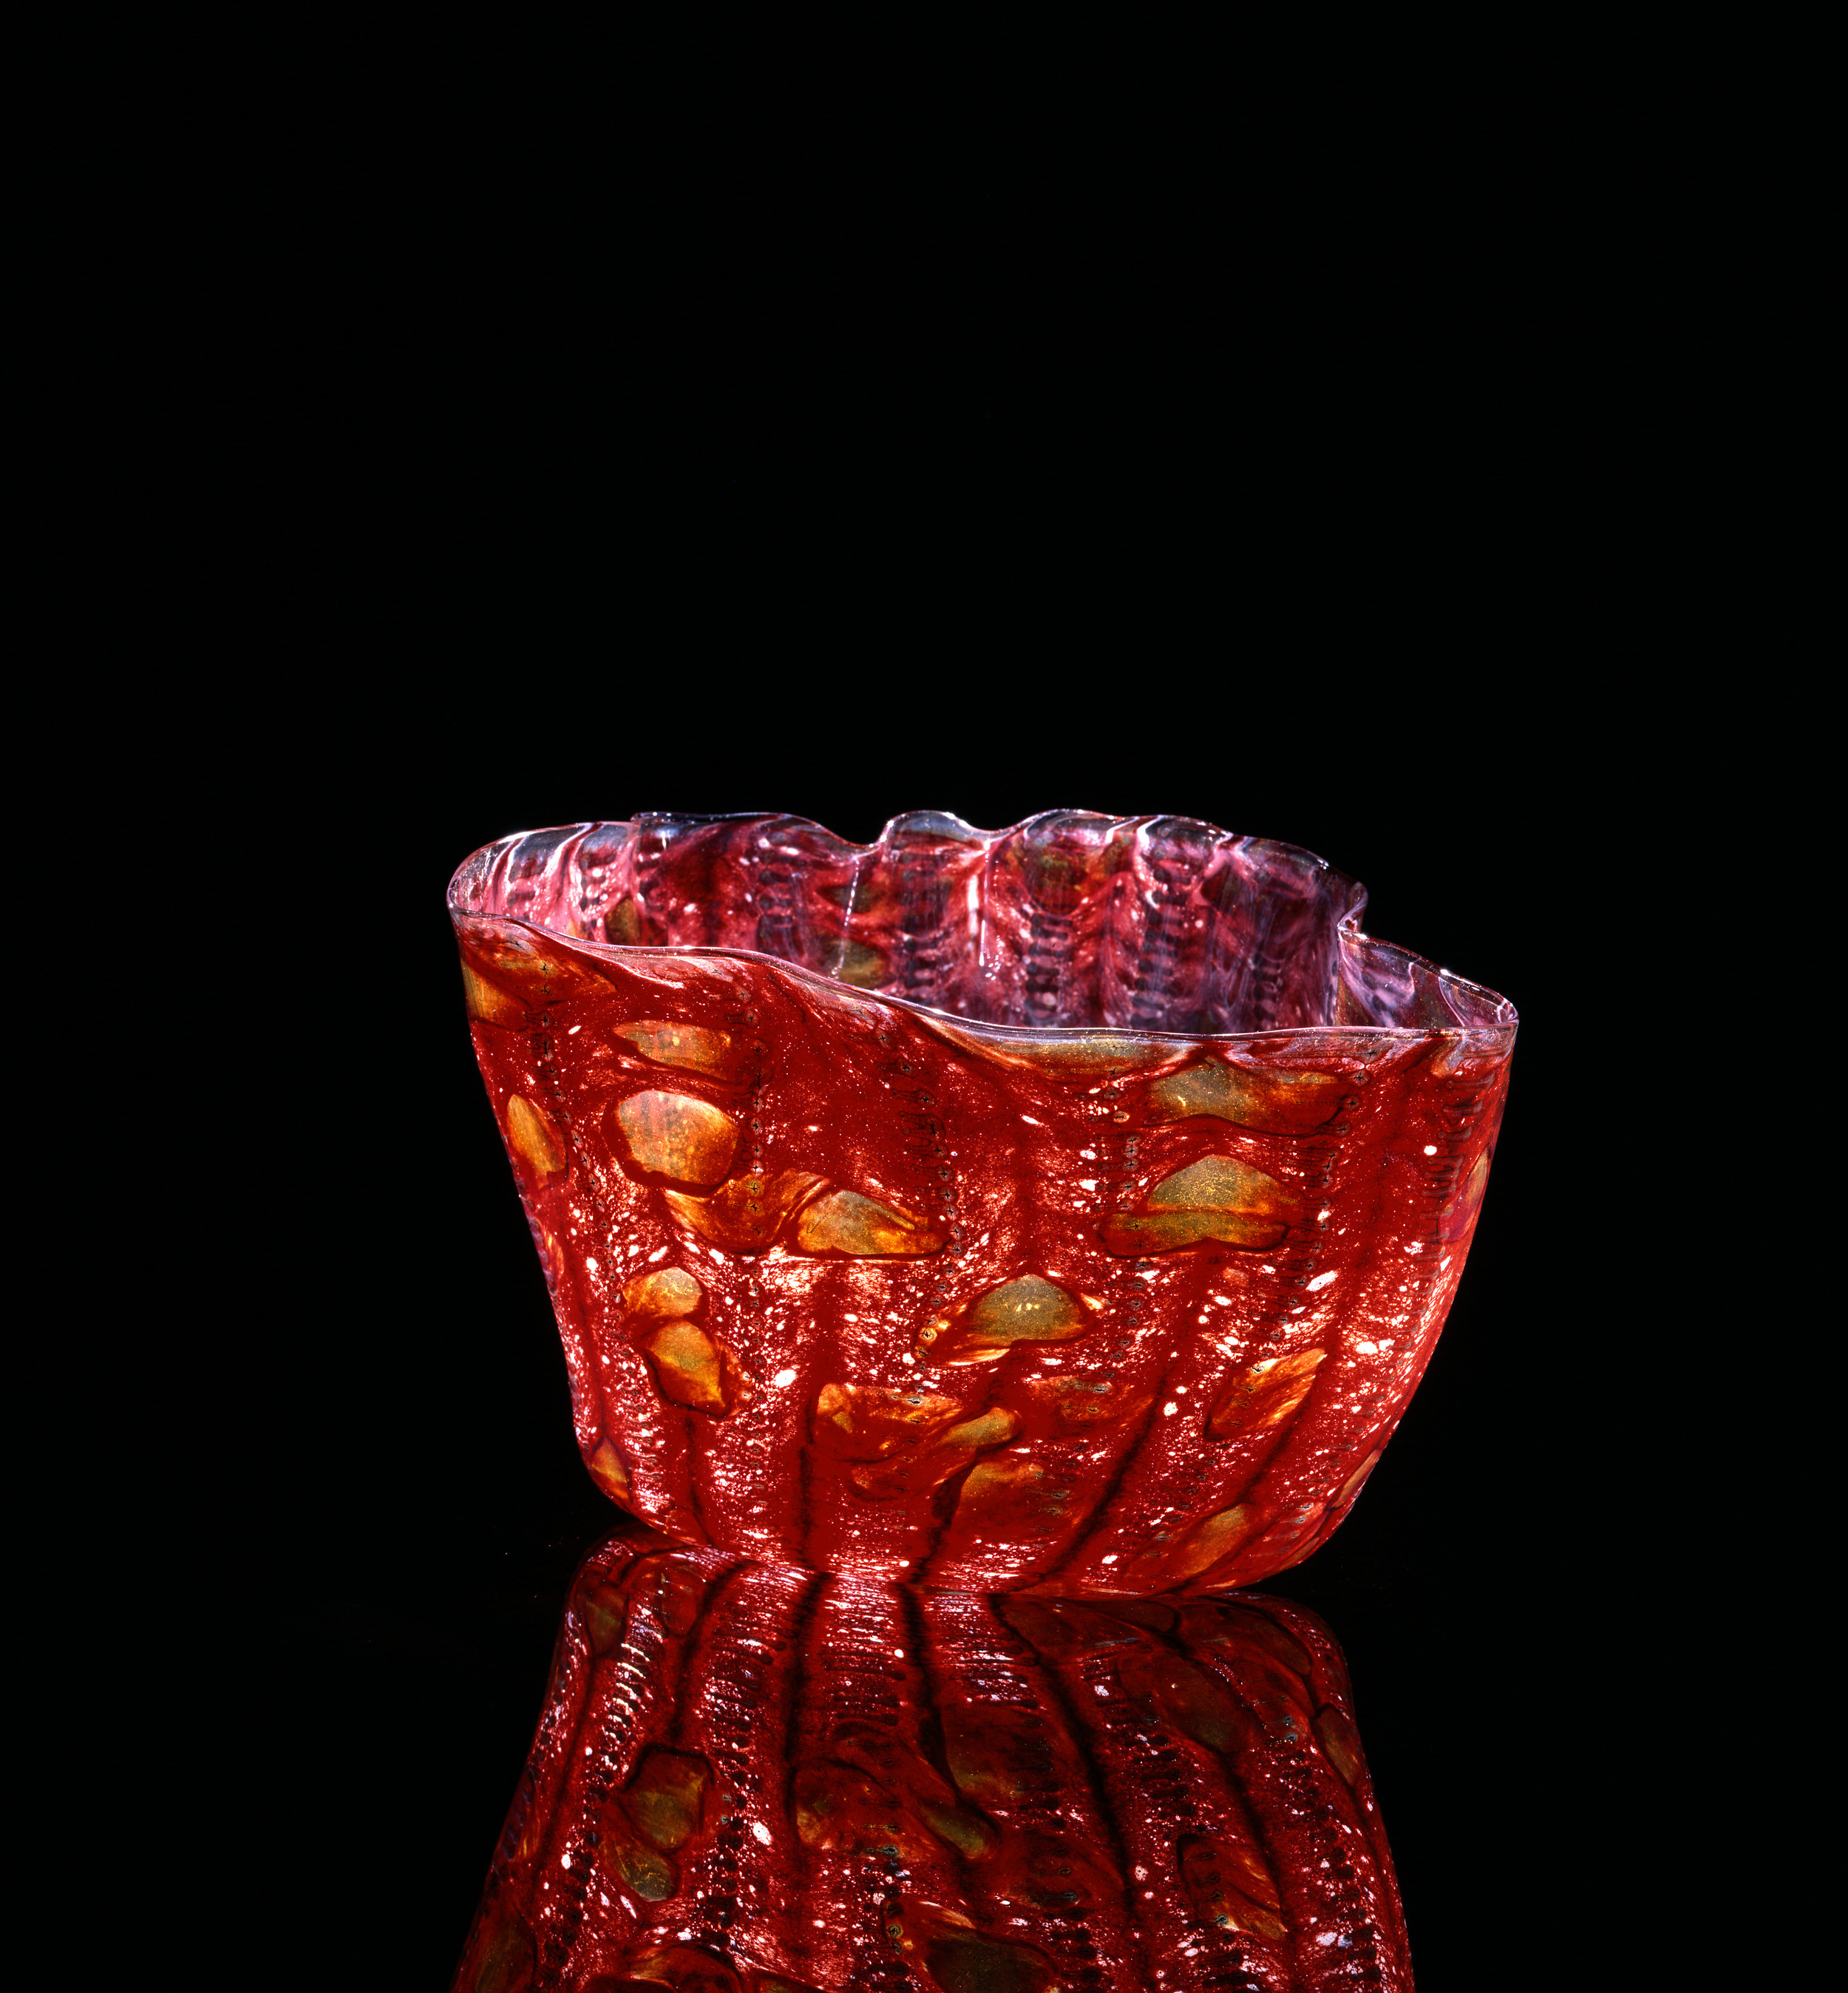  Dale Chihuly,  Prometheus Red Macchia with Sienna Jimmies  &nbsp; (1982, glass, 8 x 9 x 8&nbsp;inches), DC.112 